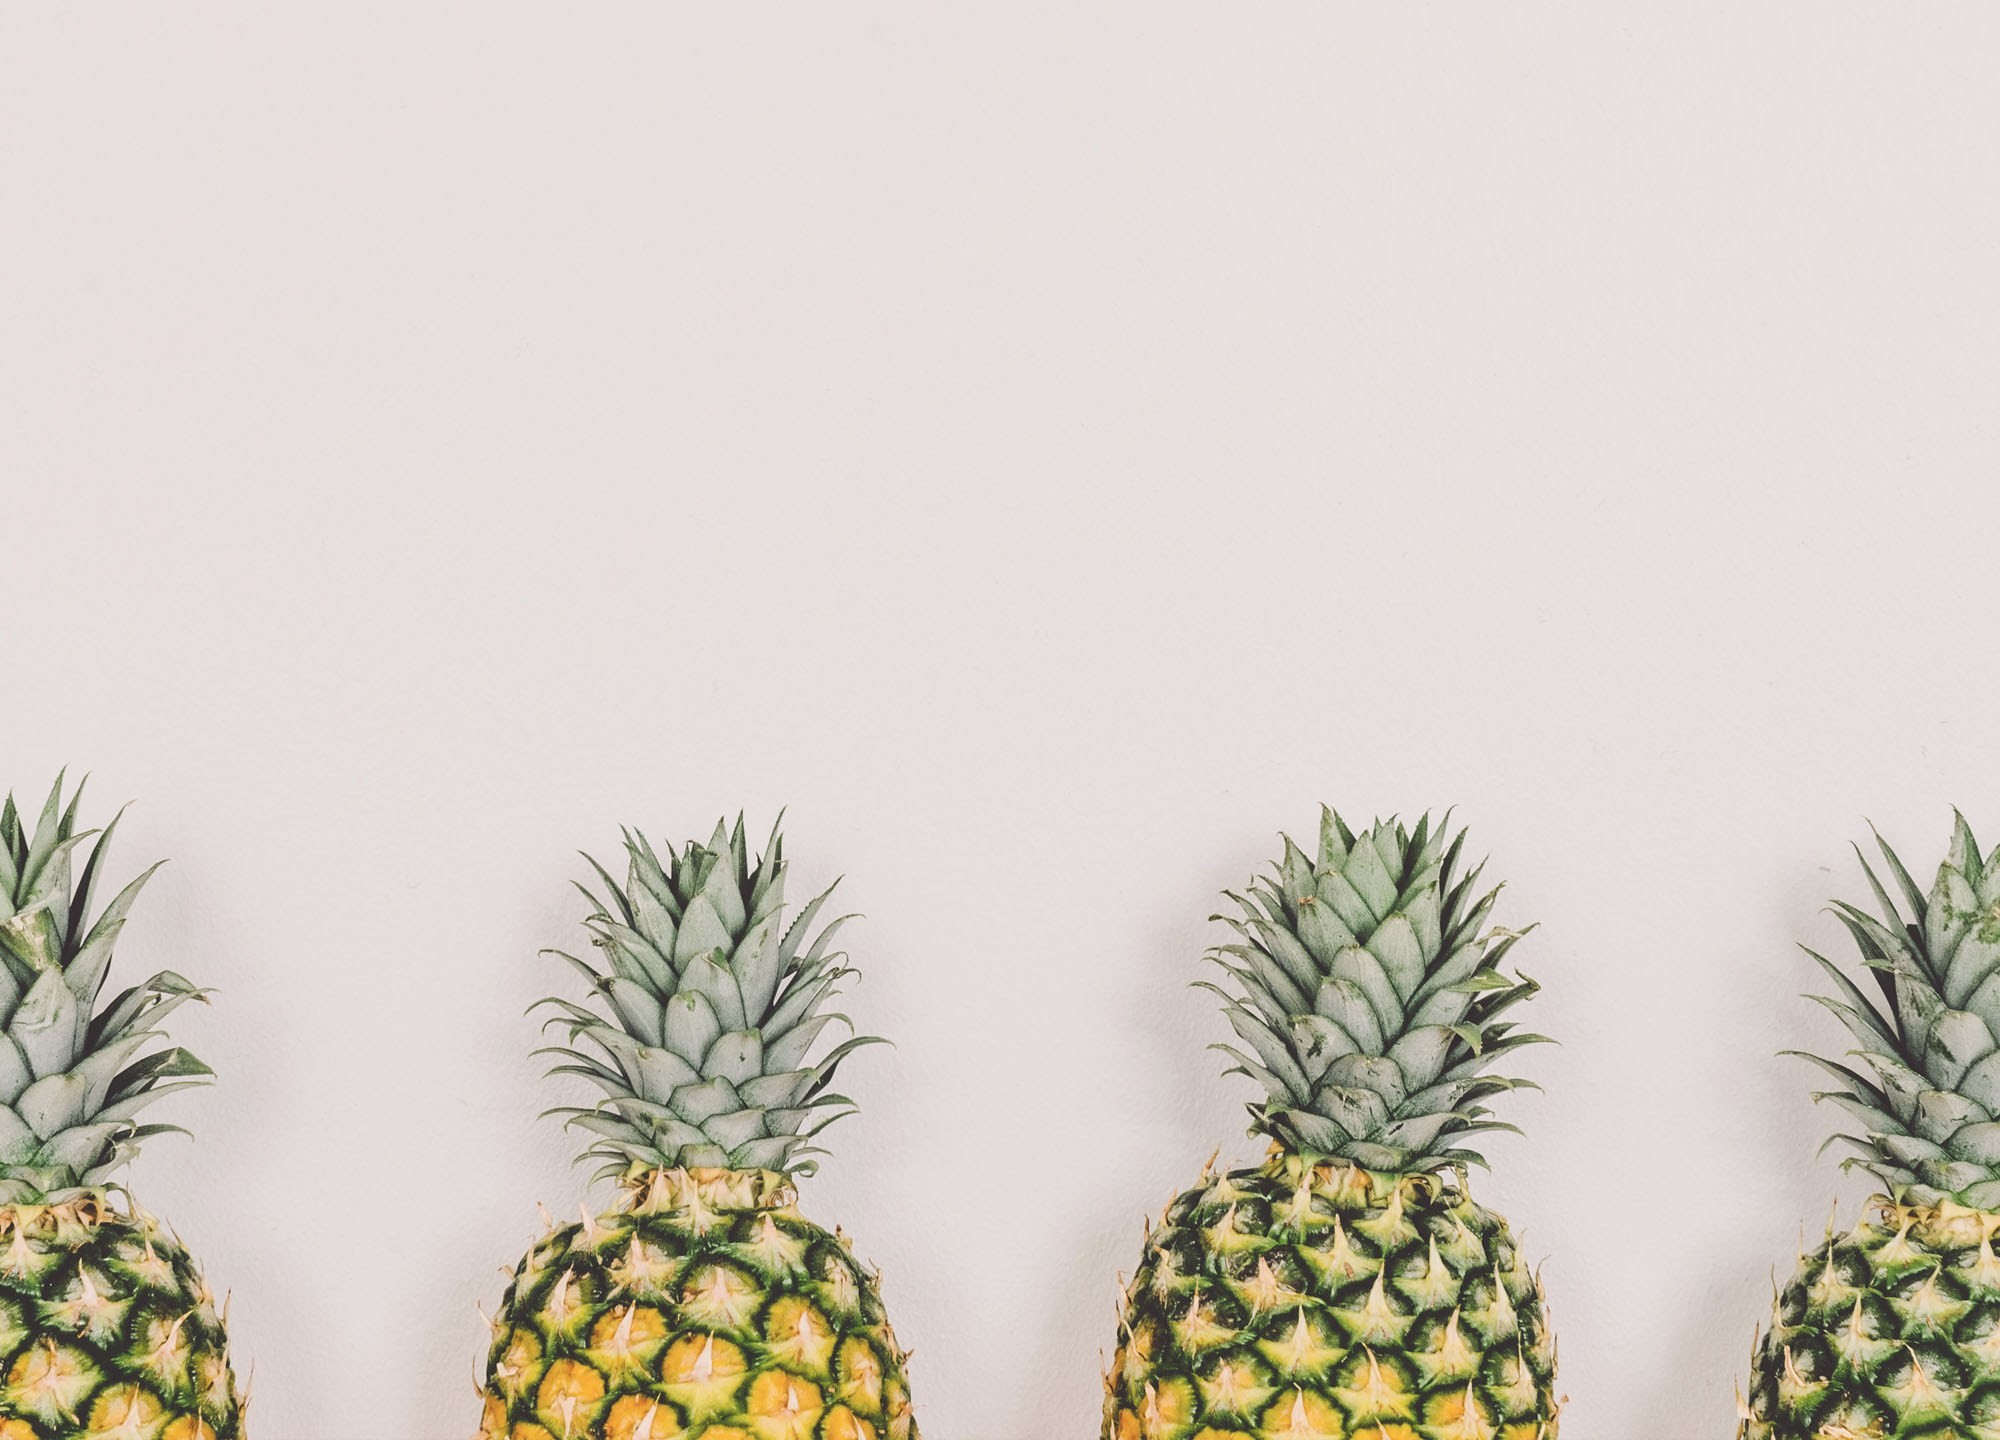 Pineapple Lineup - You Can Never Plan The Future - HD Wallpaper 